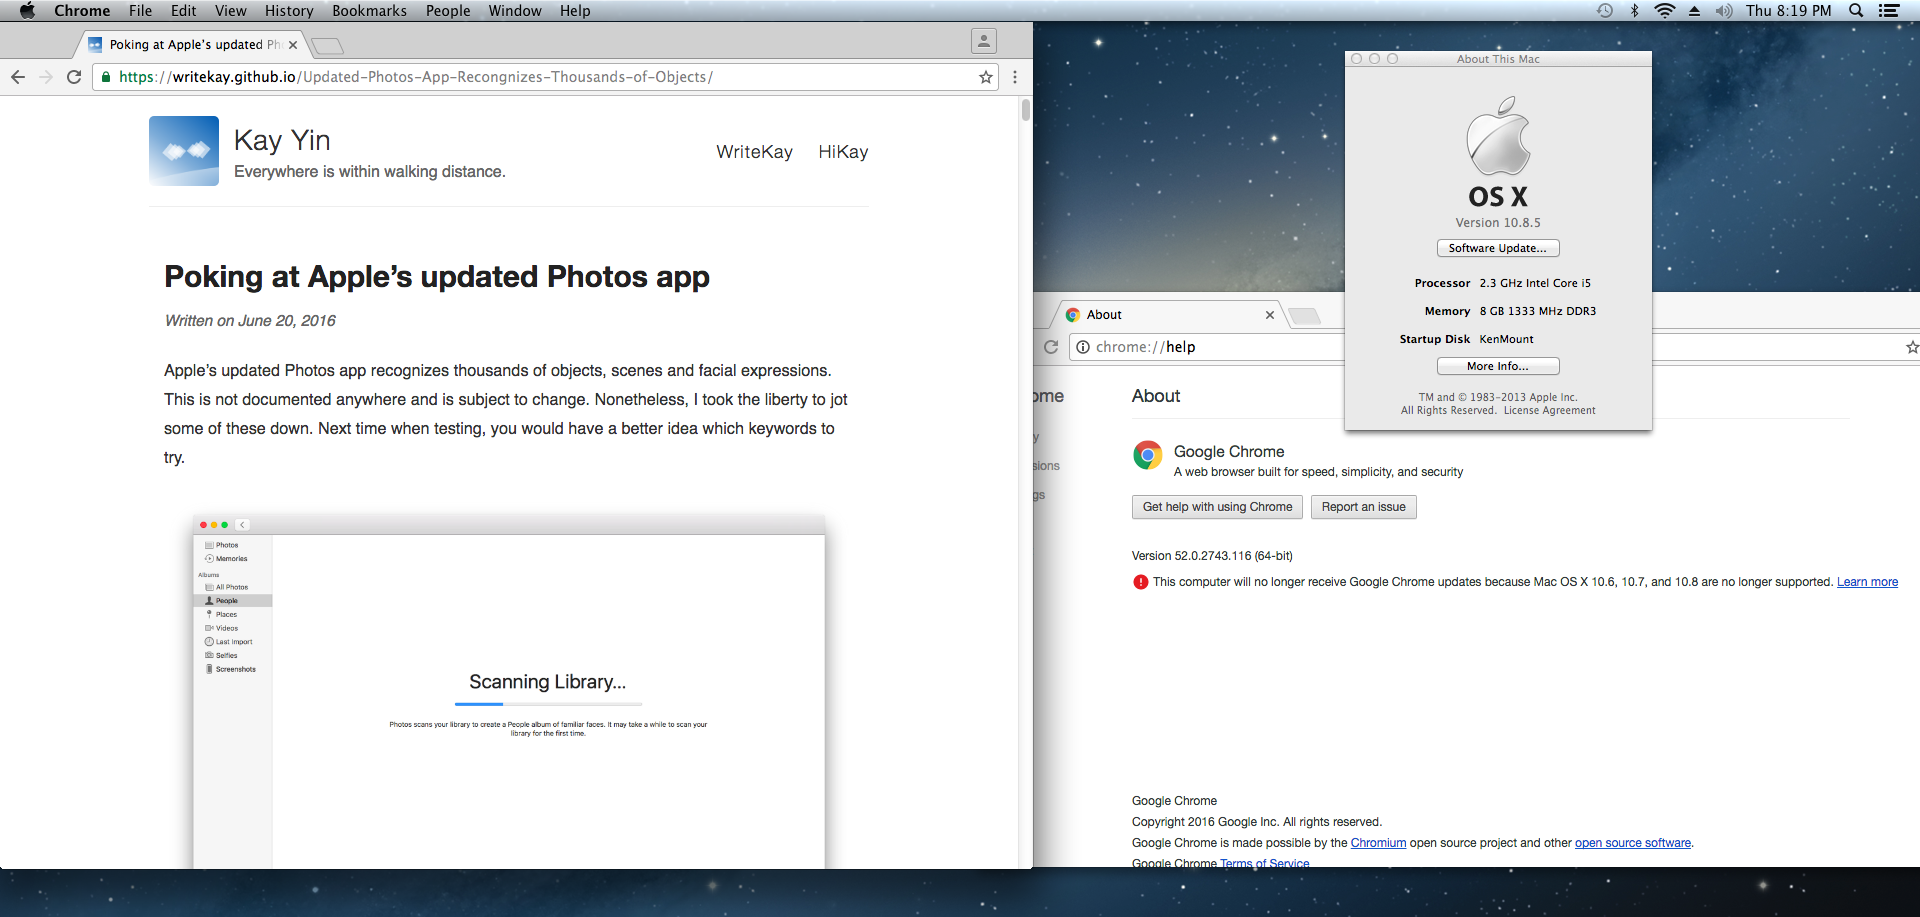 Chrome Update For Mac Os X Version 10.6.8